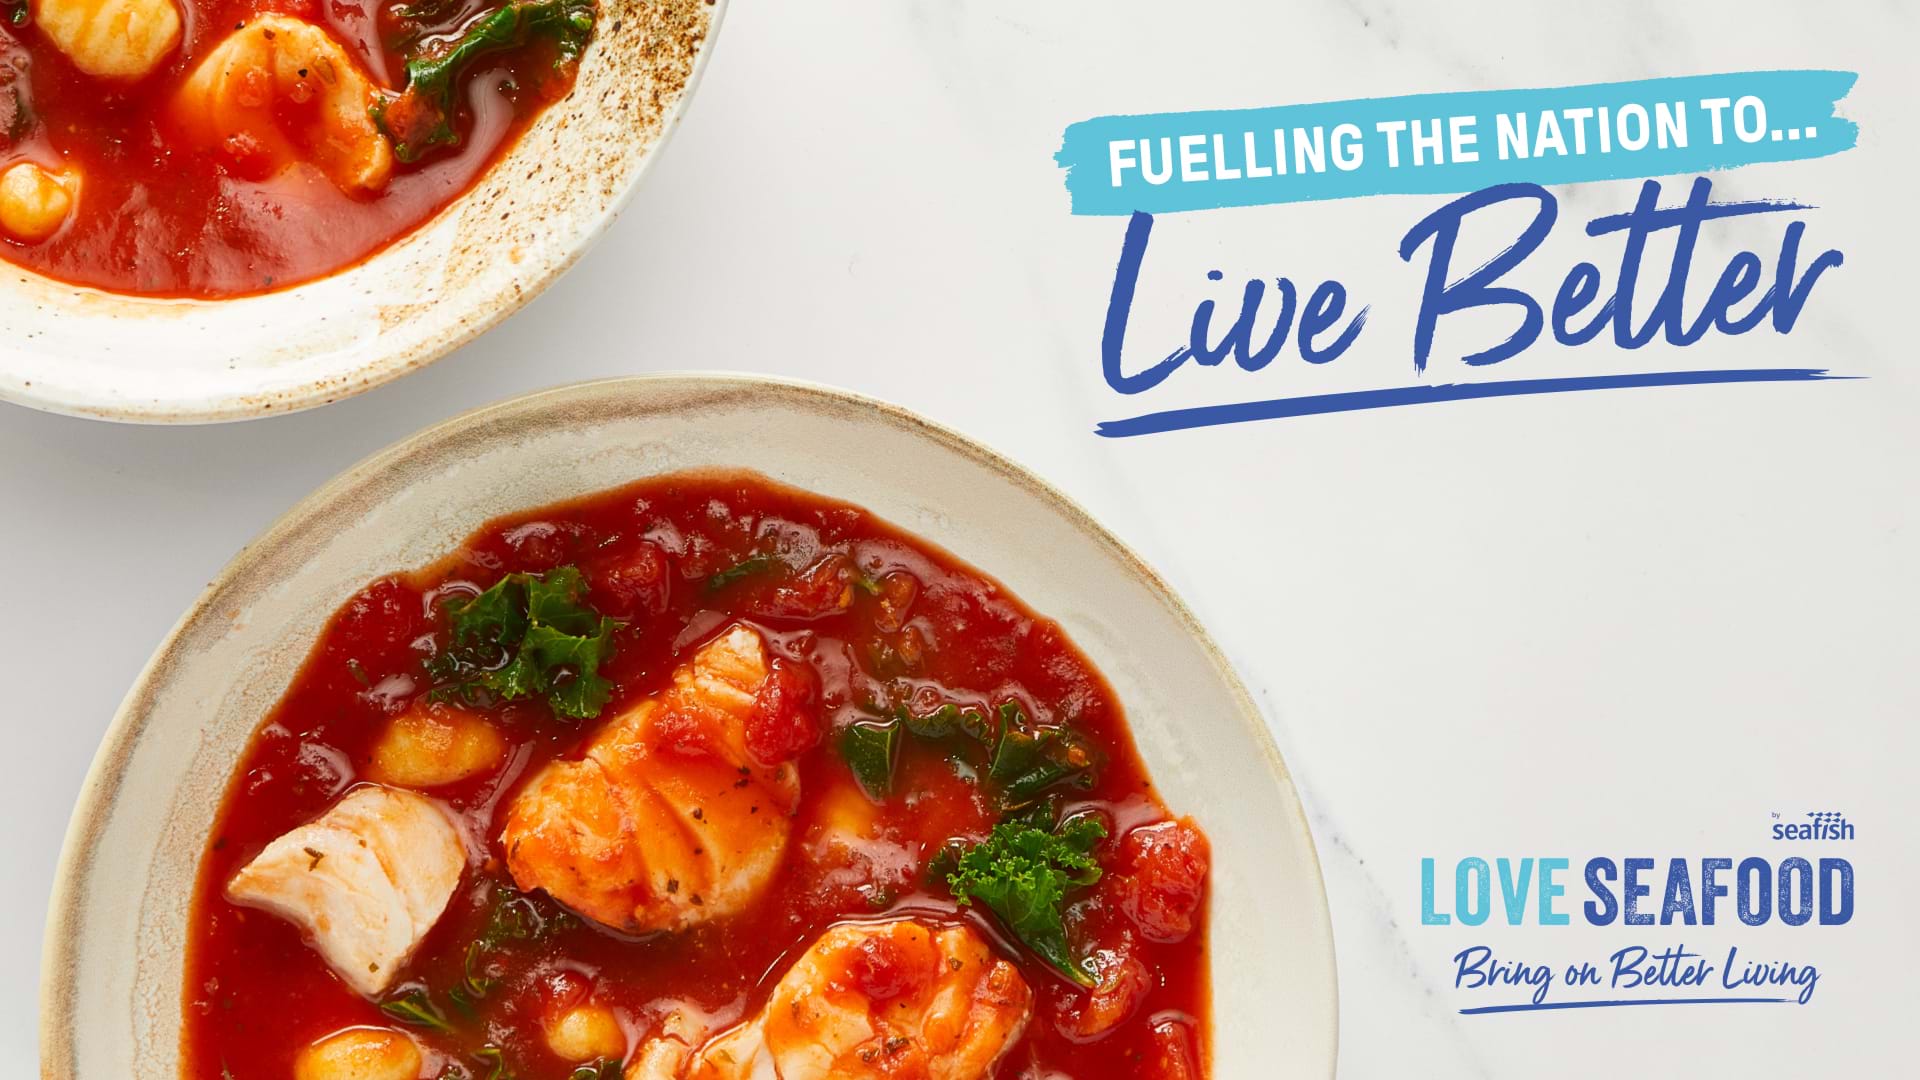 Love Seafood graphic Photo of seafood dish with Love Seafood logo with bring on better living tagline. Test says 'fuelling the nation to Live Better